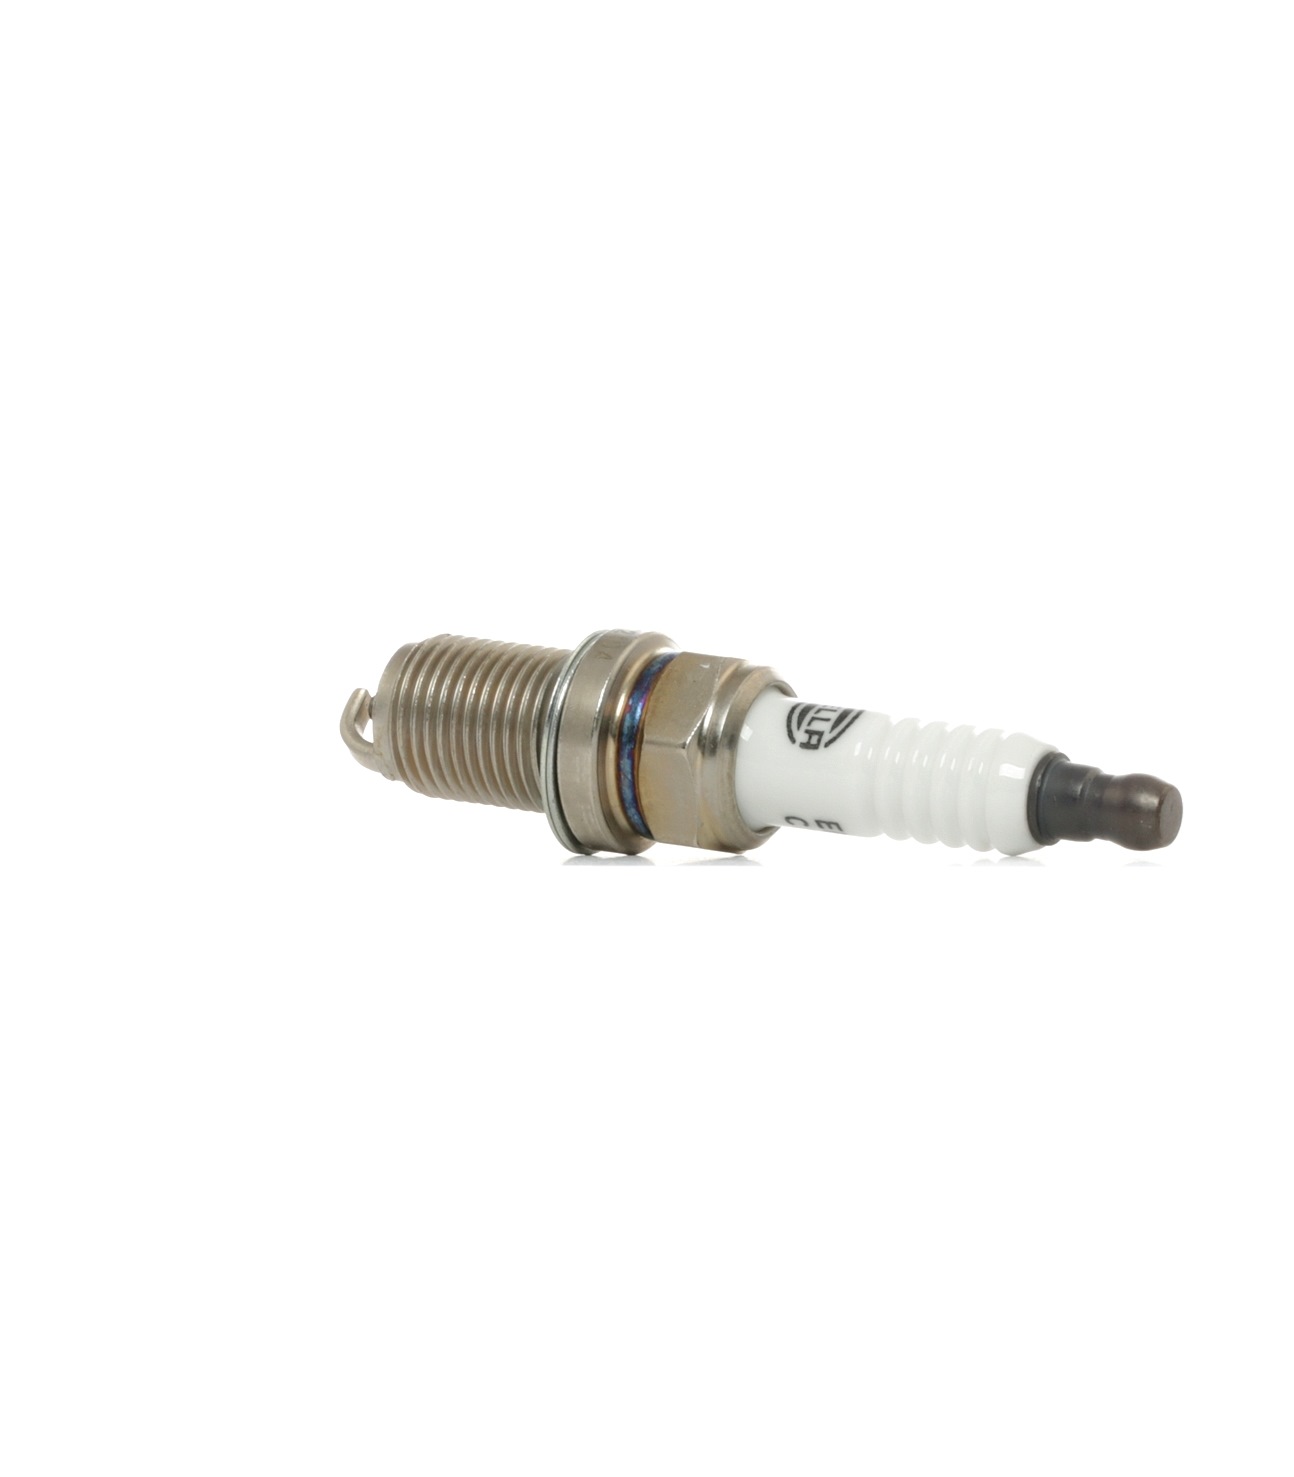 HELLA 8EH 188 704-271 Spark plug cheap in online store